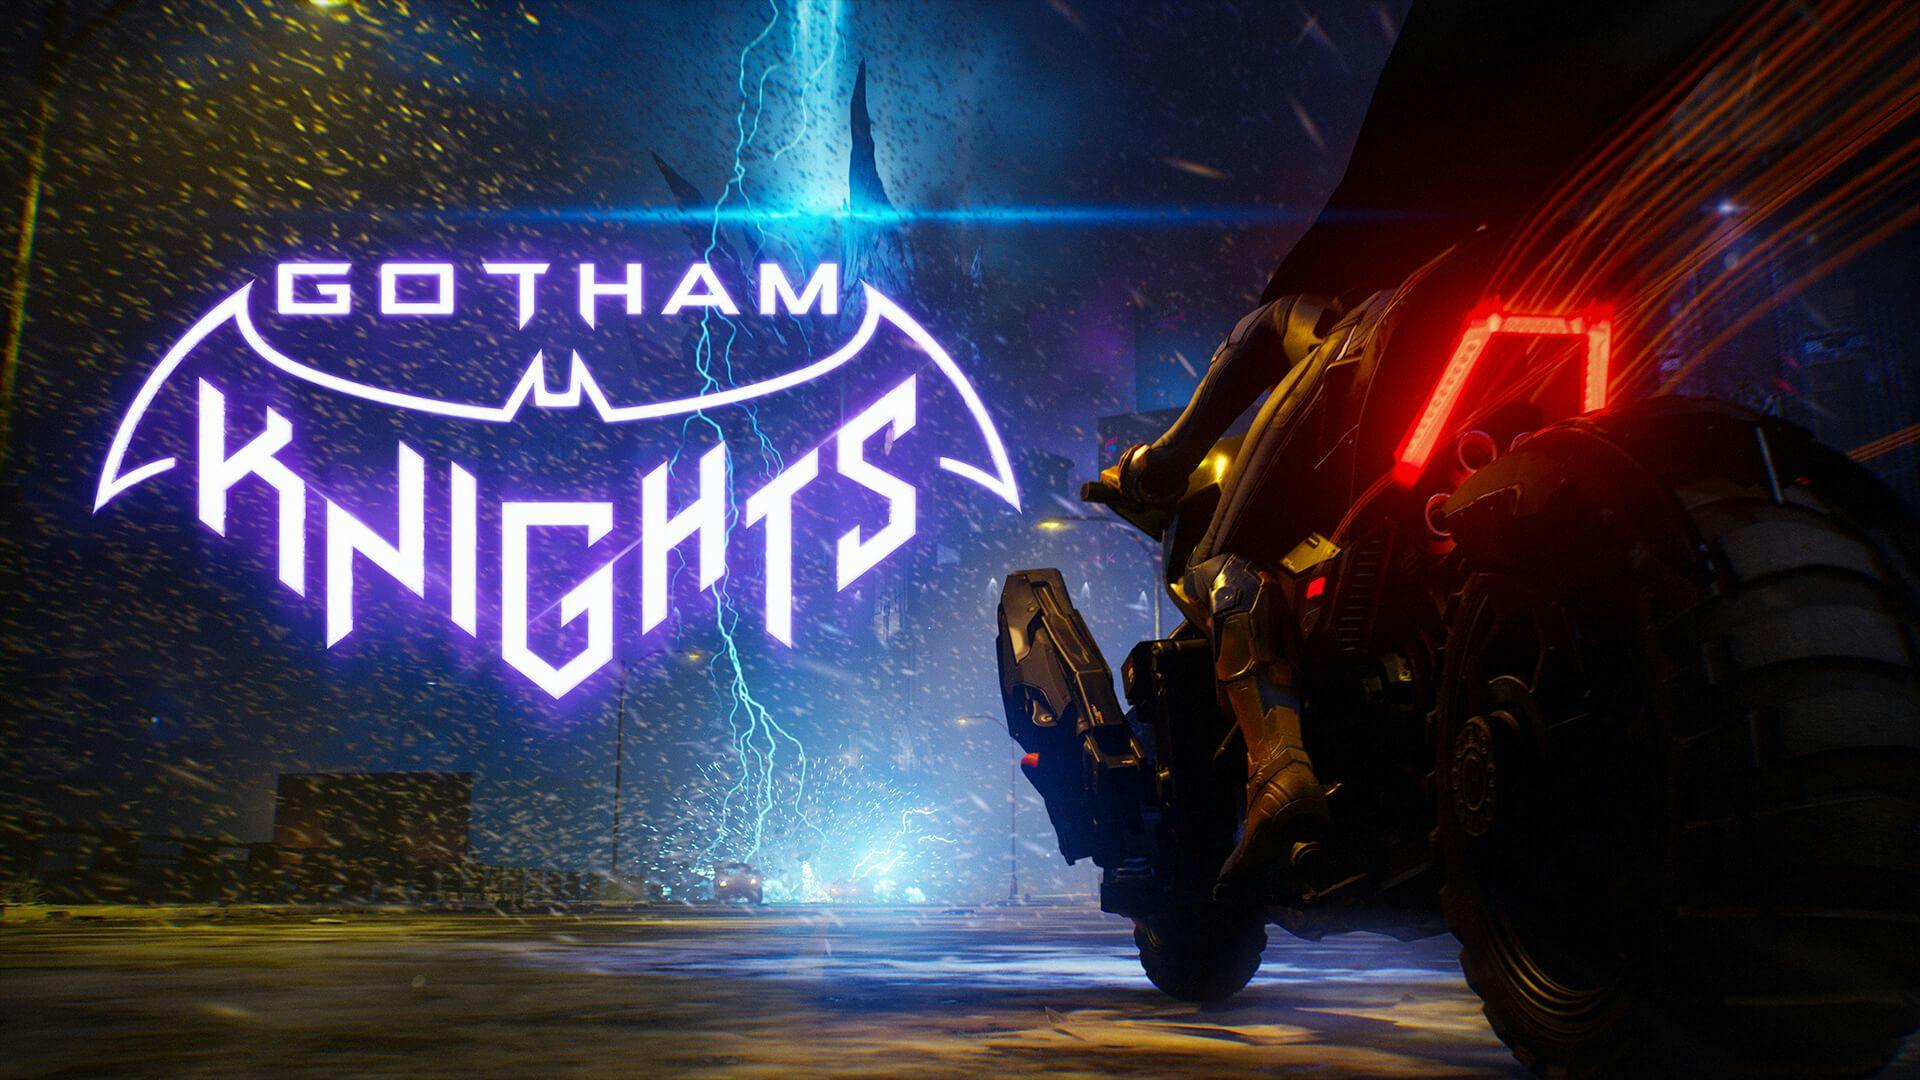 /the-next-batman-game-gotham-knights-release-date-story-gameplay-b31l34cz feature image